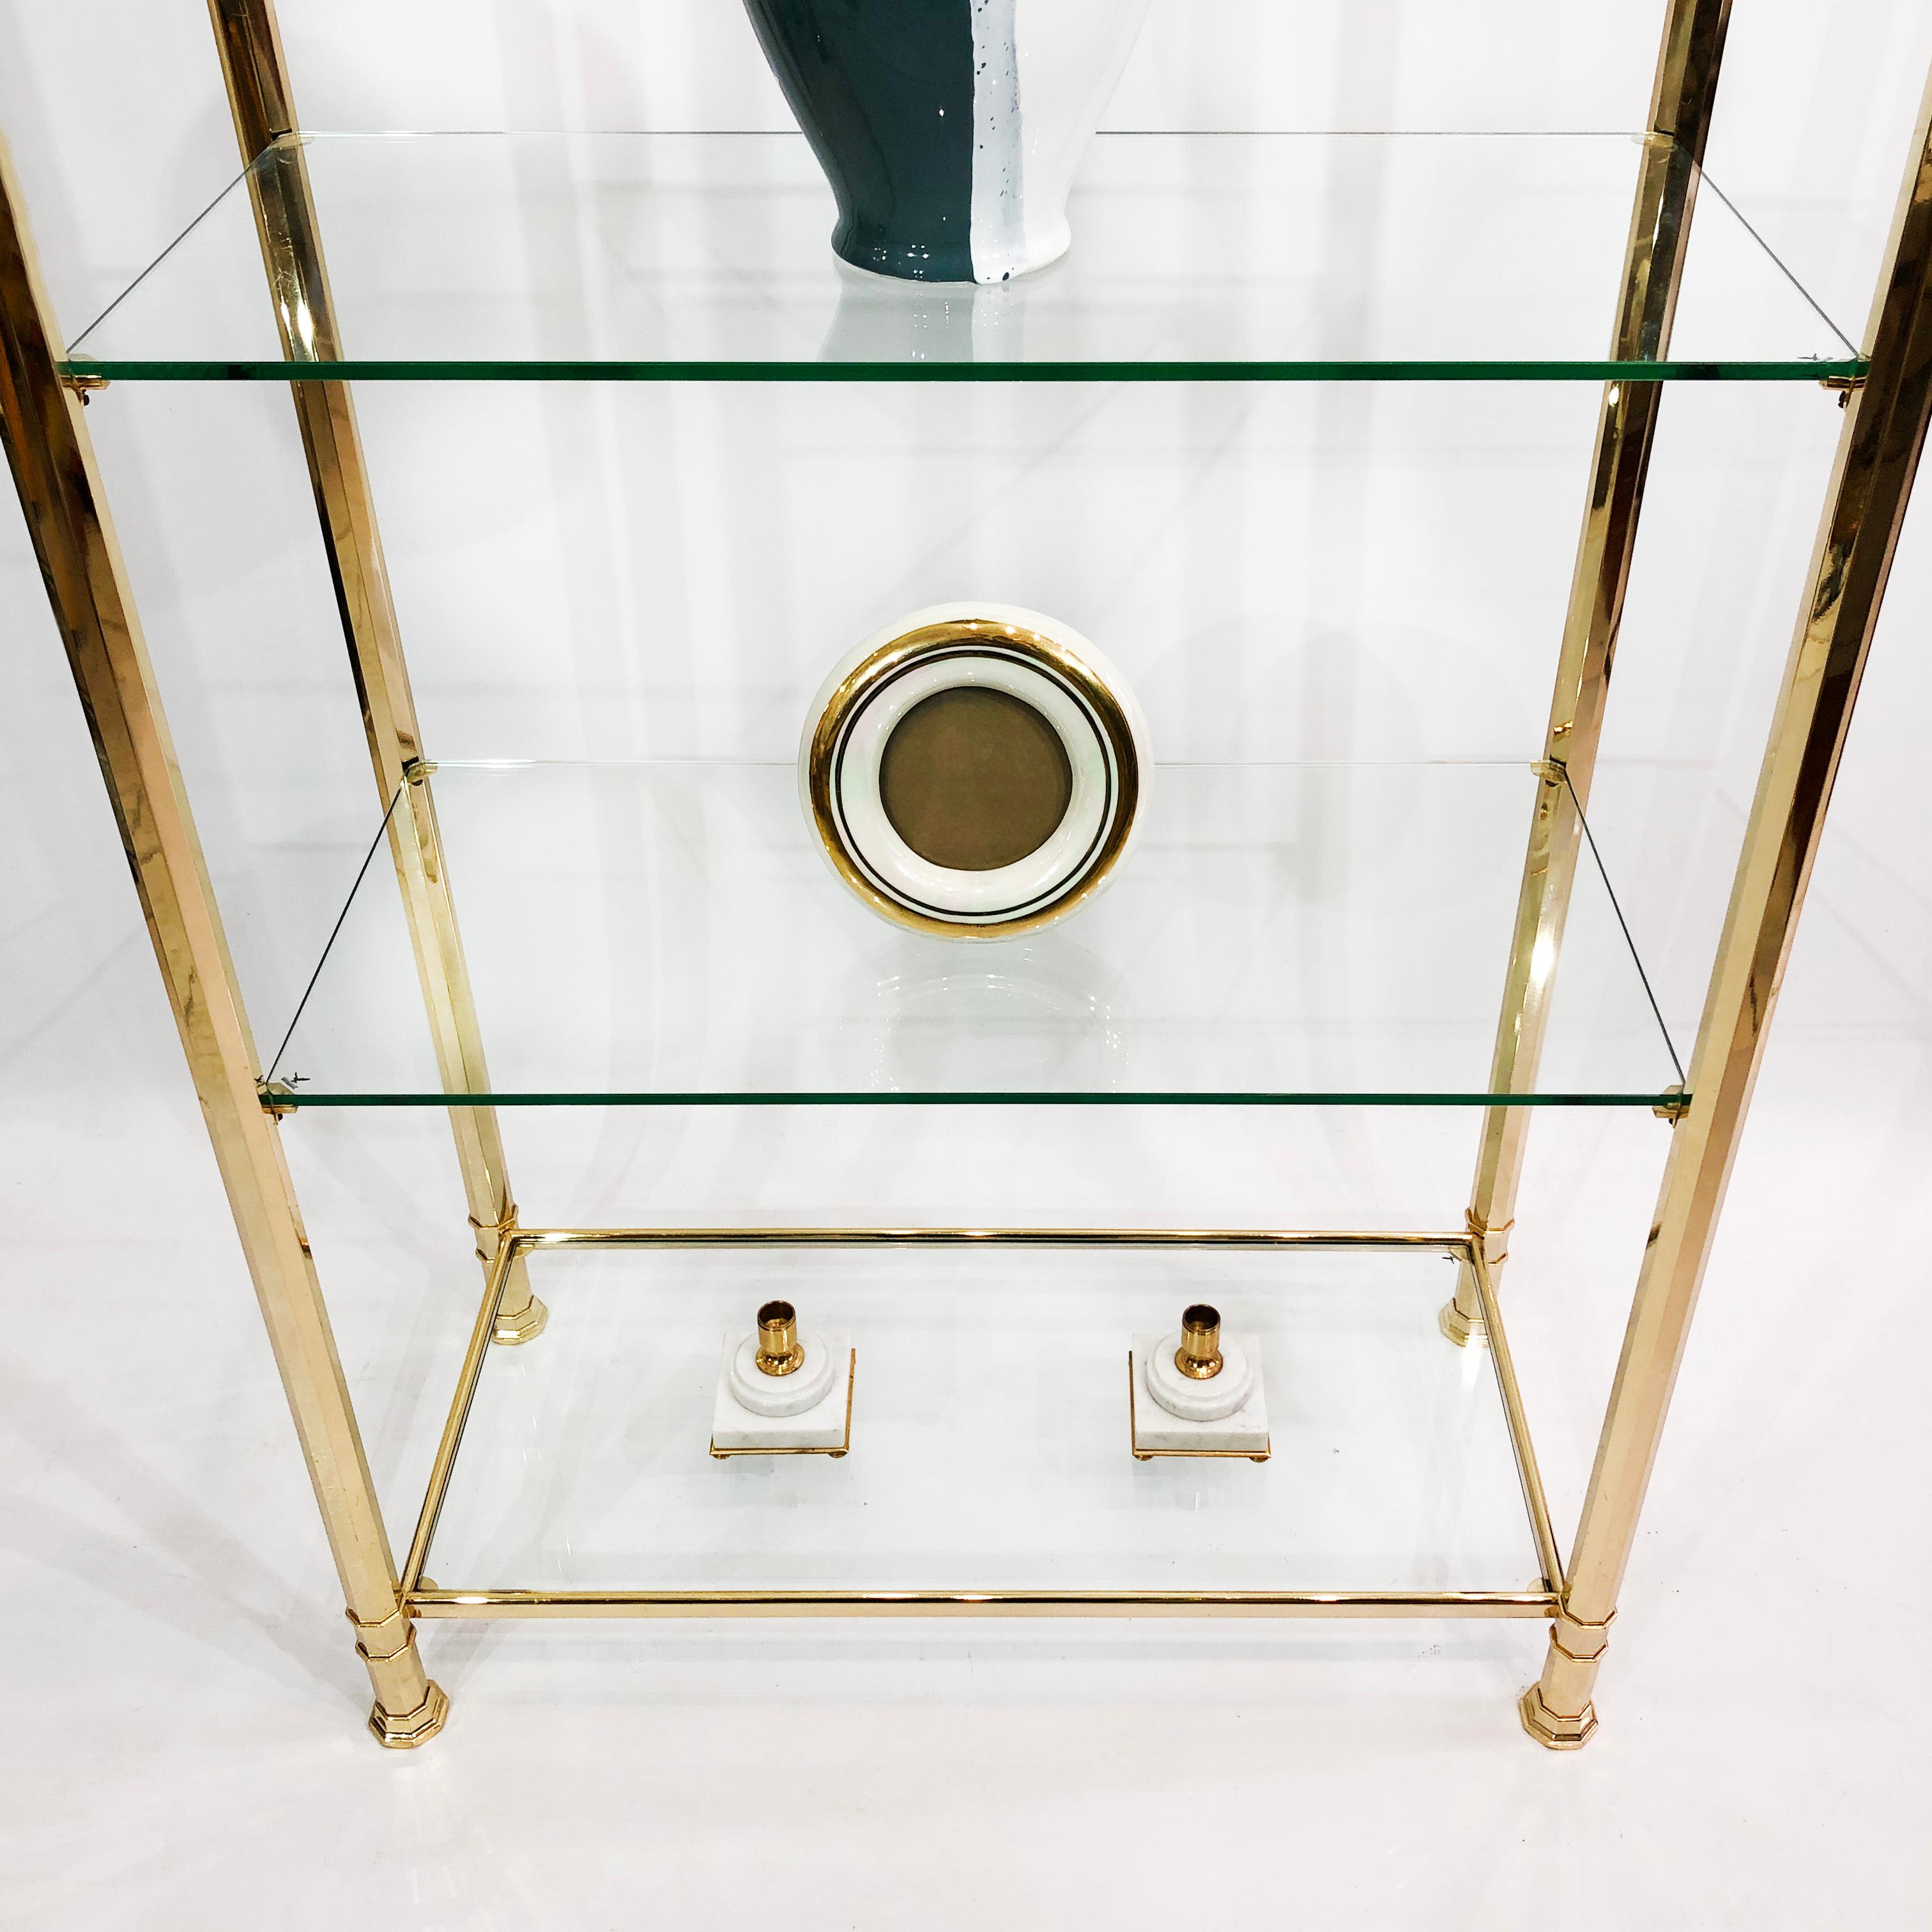 gold and glass shelving unit